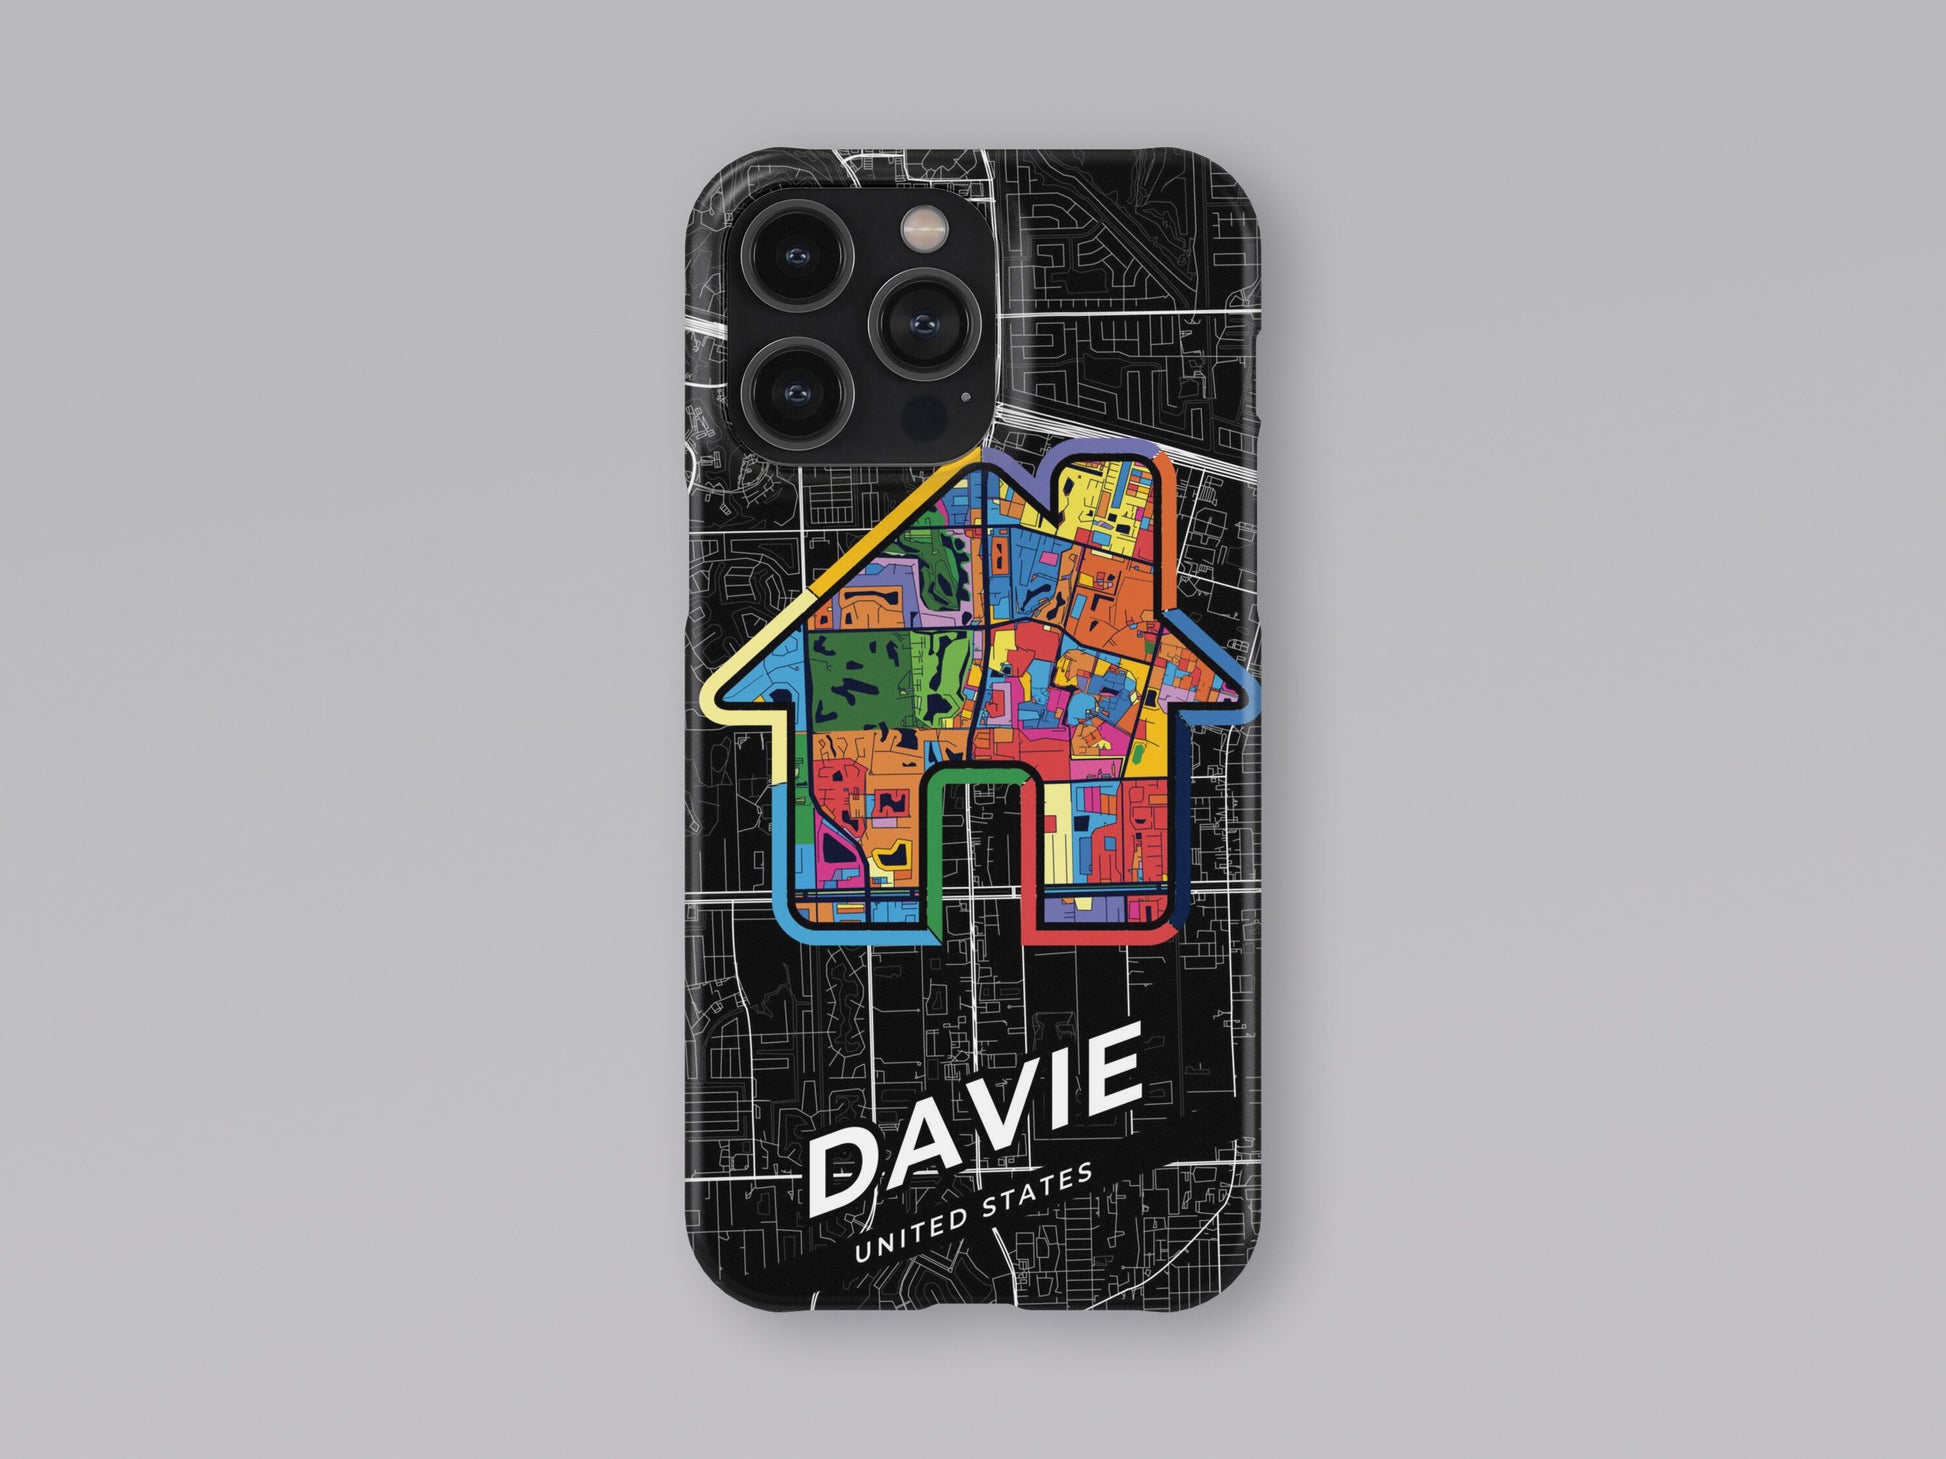 Davie Florida slim phone case with colorful icon. Birthday, wedding or housewarming gift. Couple match cases. 3